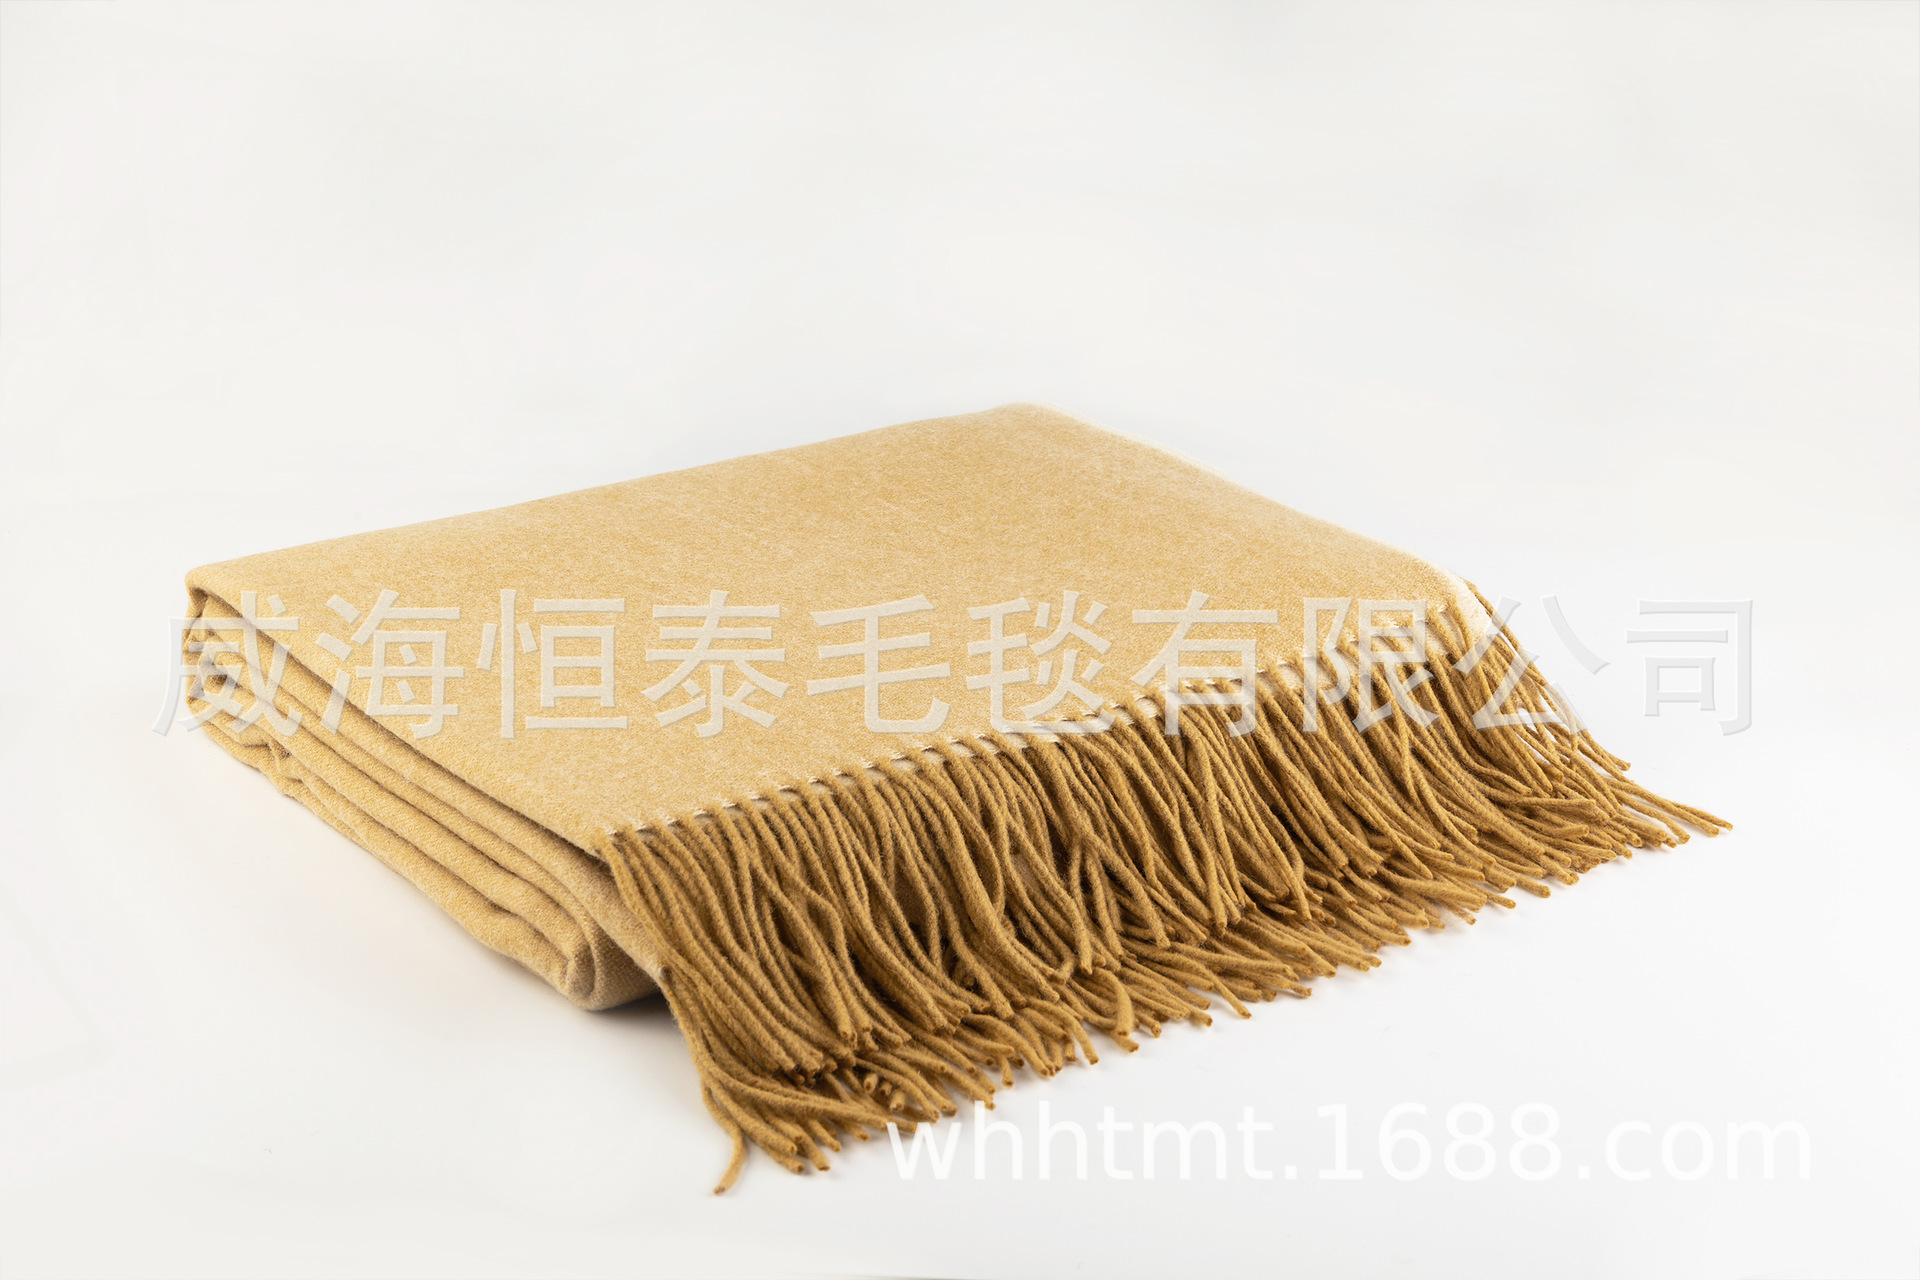 Processing Customized Export Domestic Sales Woolen Blanket Cashmere Blanket Light Shawl Welcome to Consult